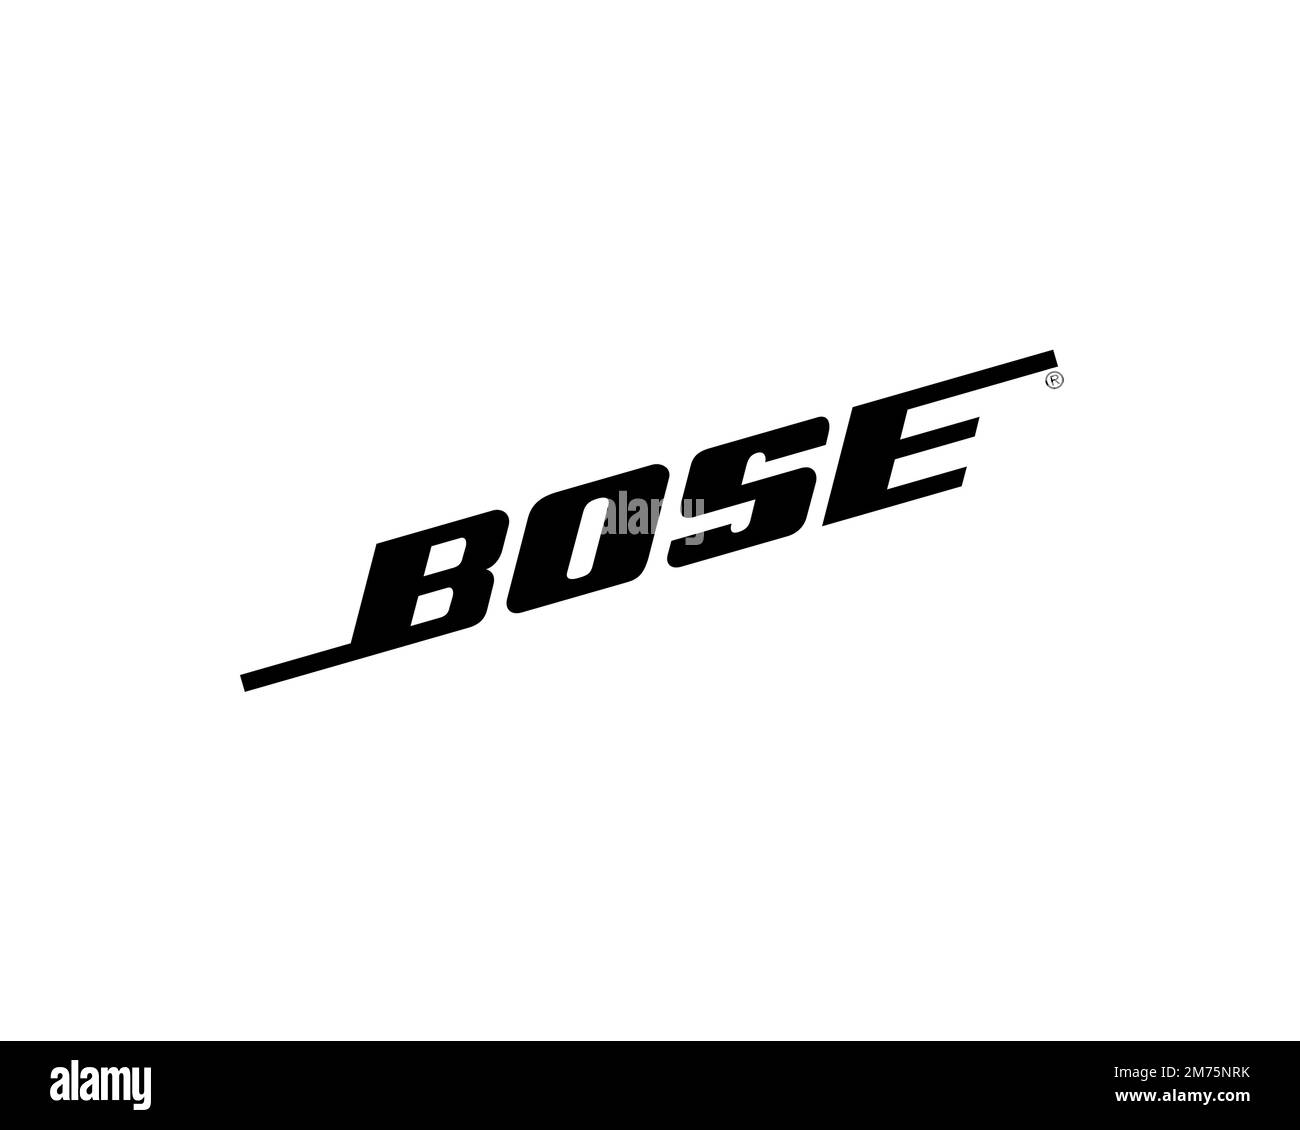 Bose corporation Black and White Stock Photos Images - Alamy